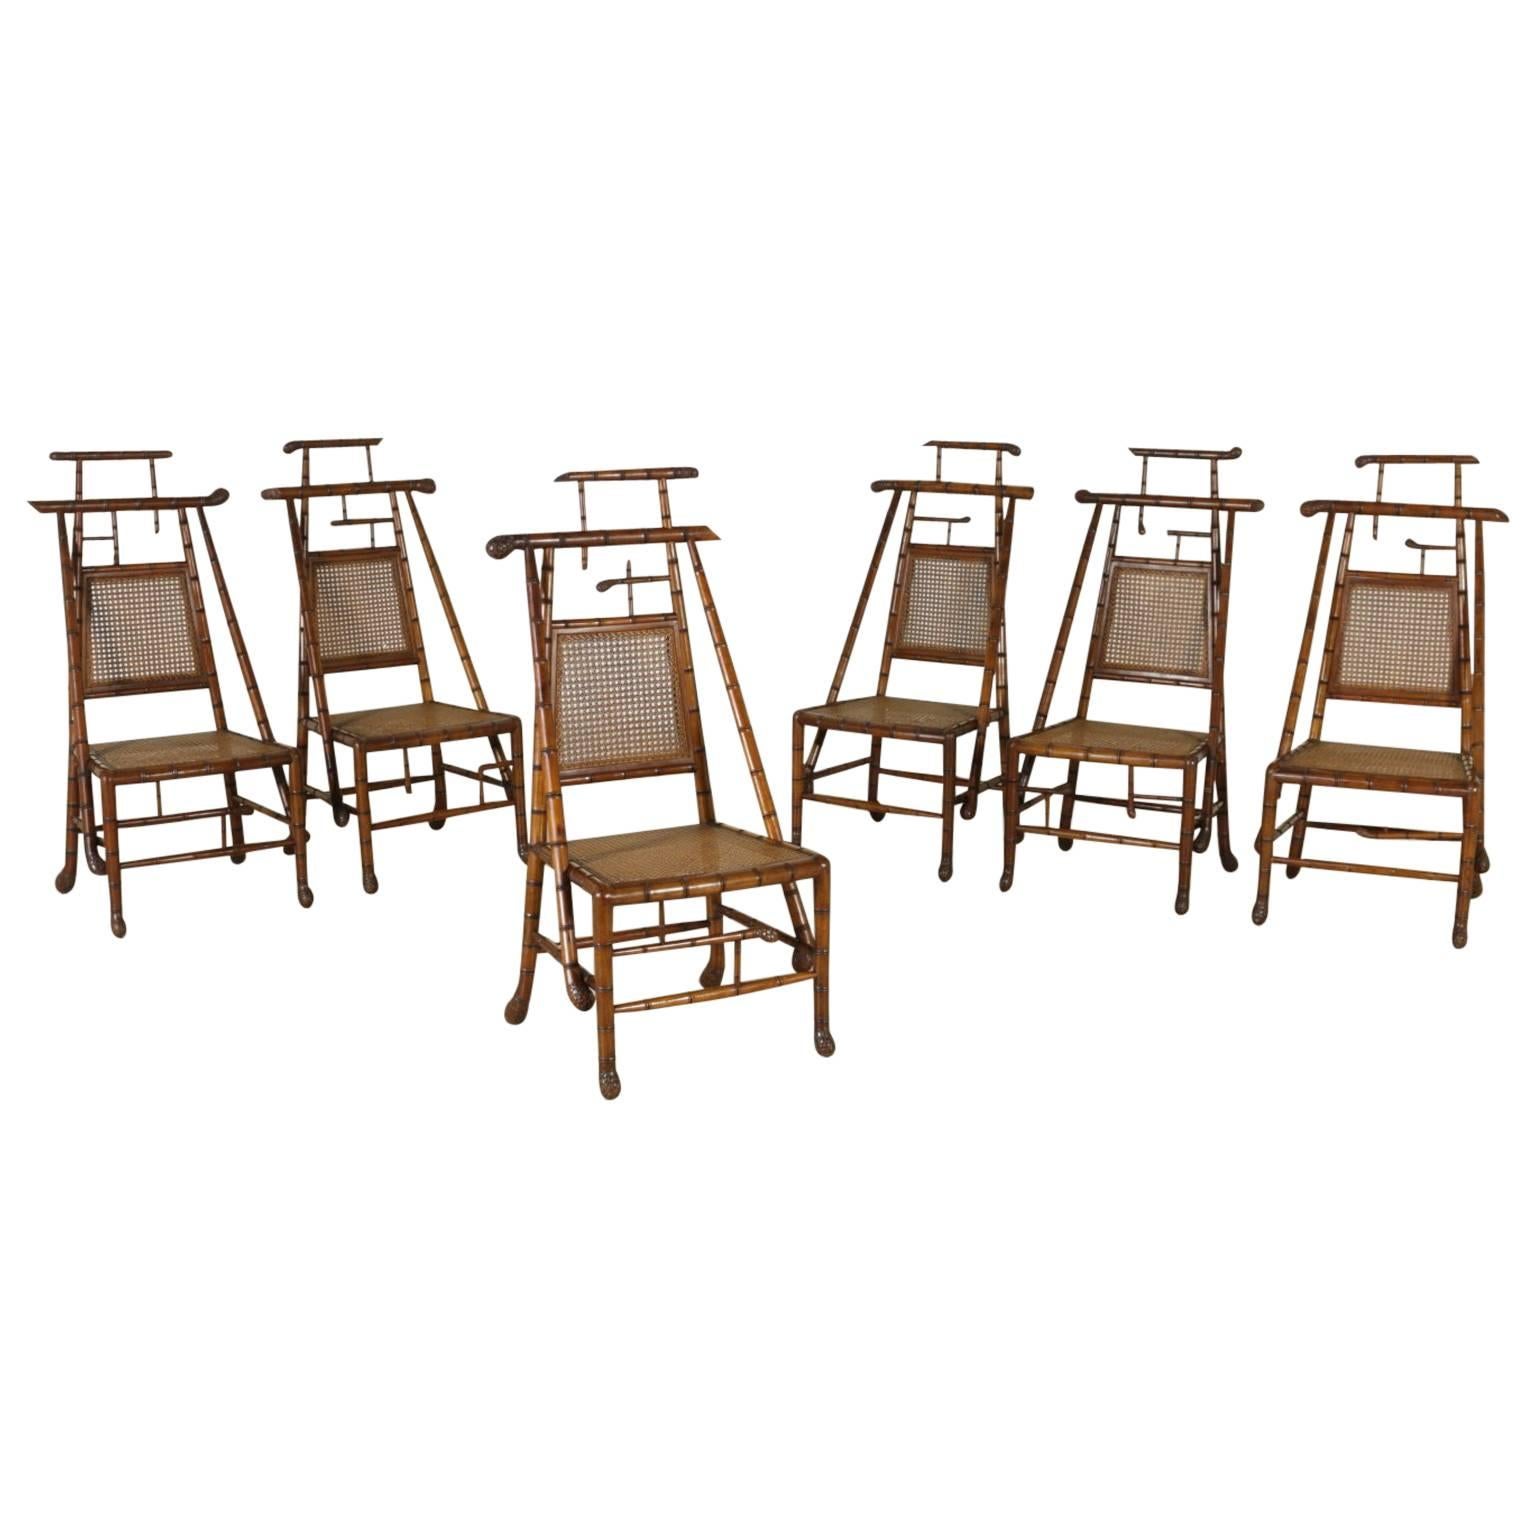 Group Six Chairs Carved Solid Maple 'Faux Bamboo' Style Italy 19th Century